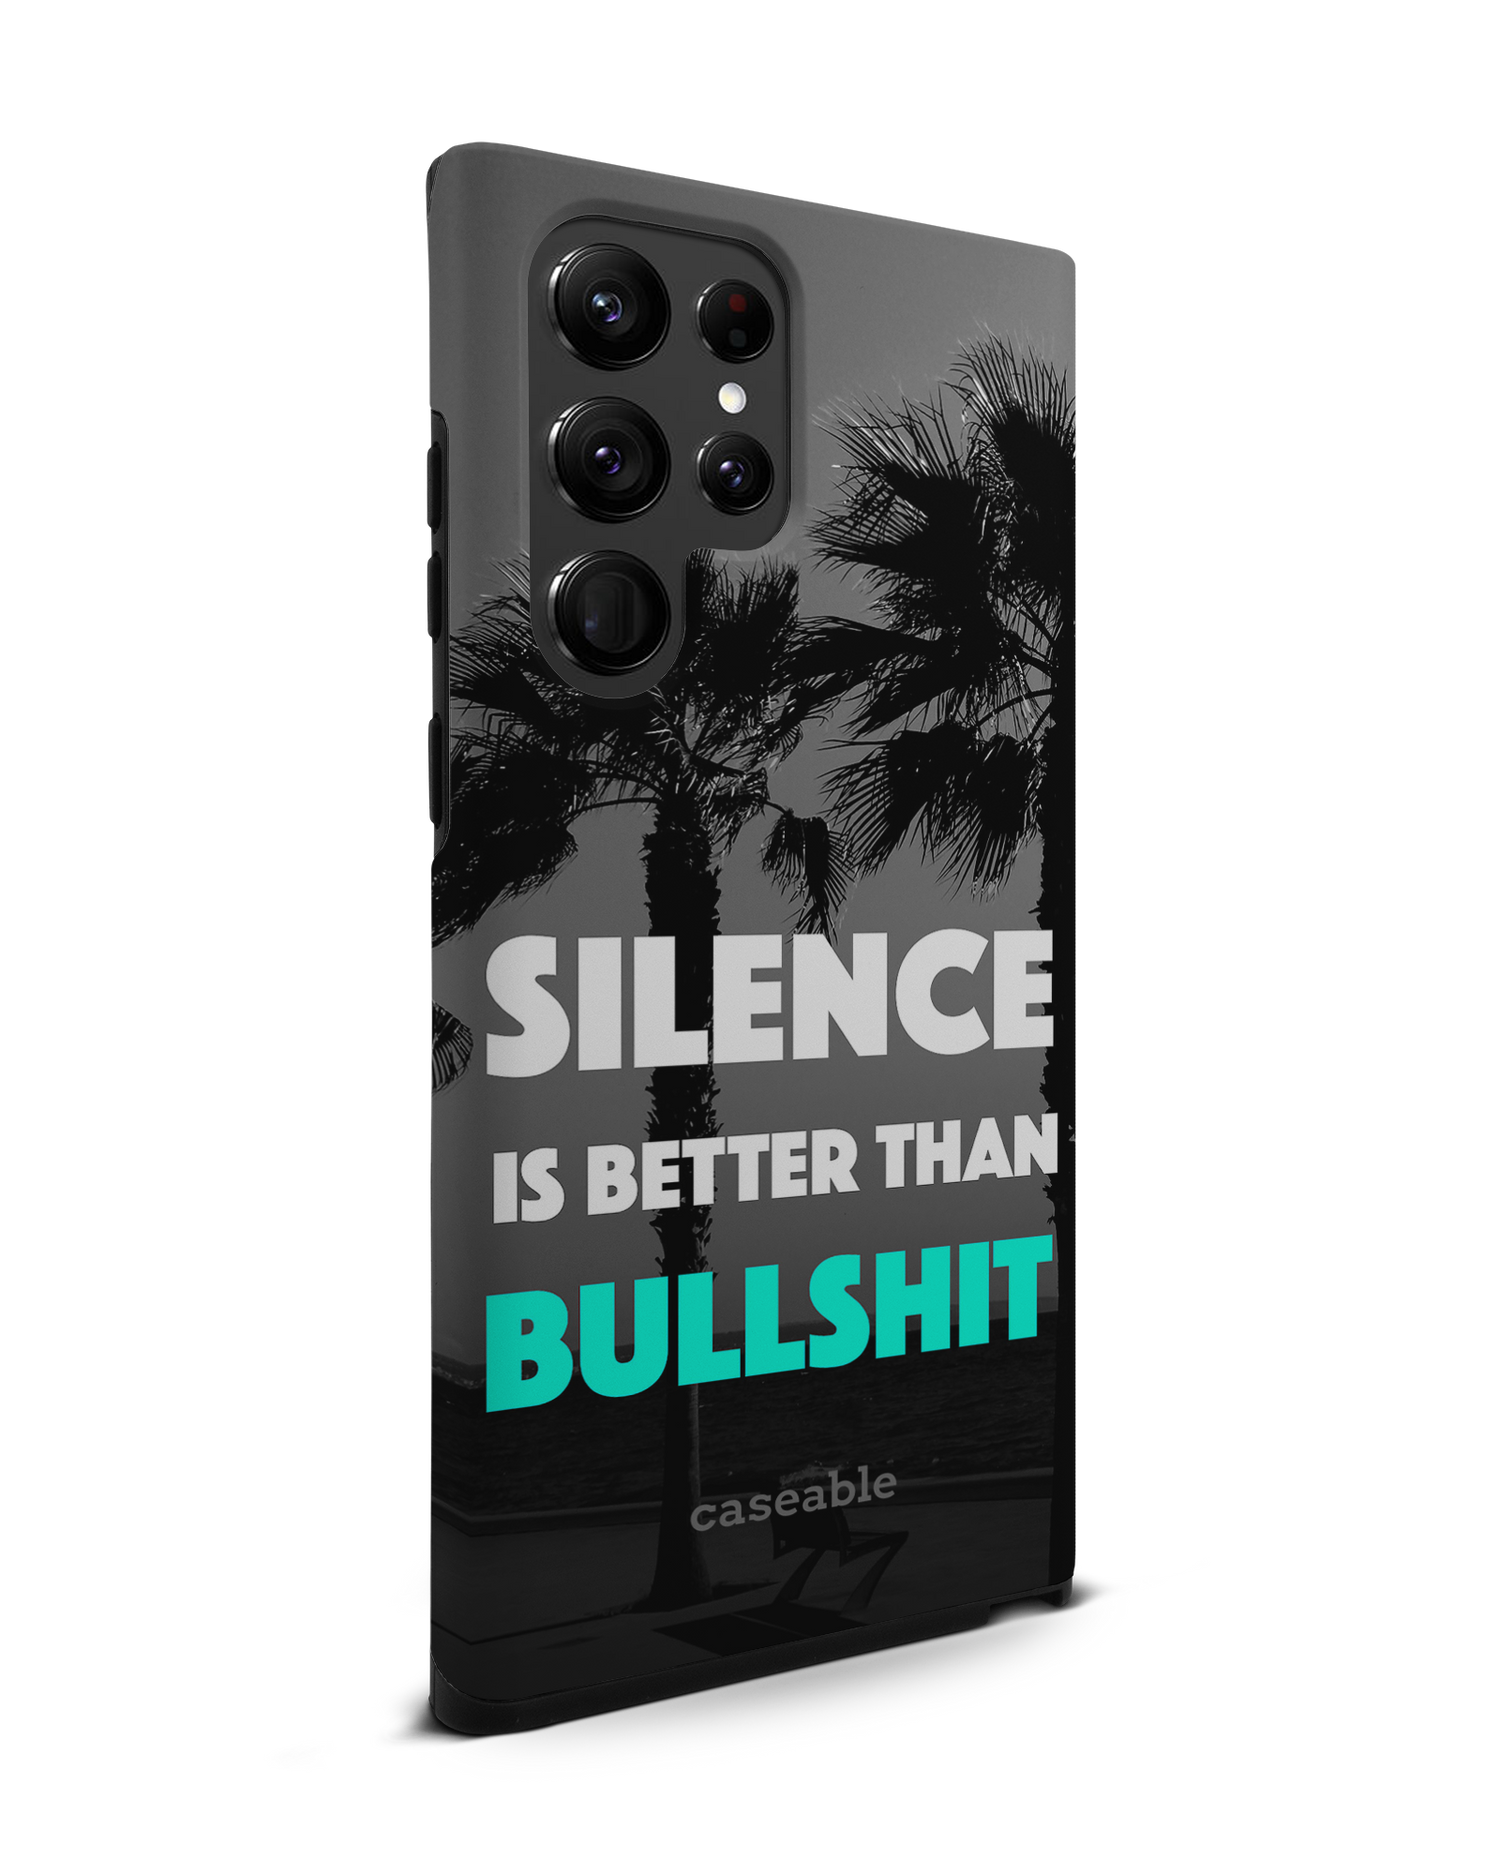 Silence is Better Premium Phone Case Samsung Galaxy S22 Ultra 5G: View from the left side